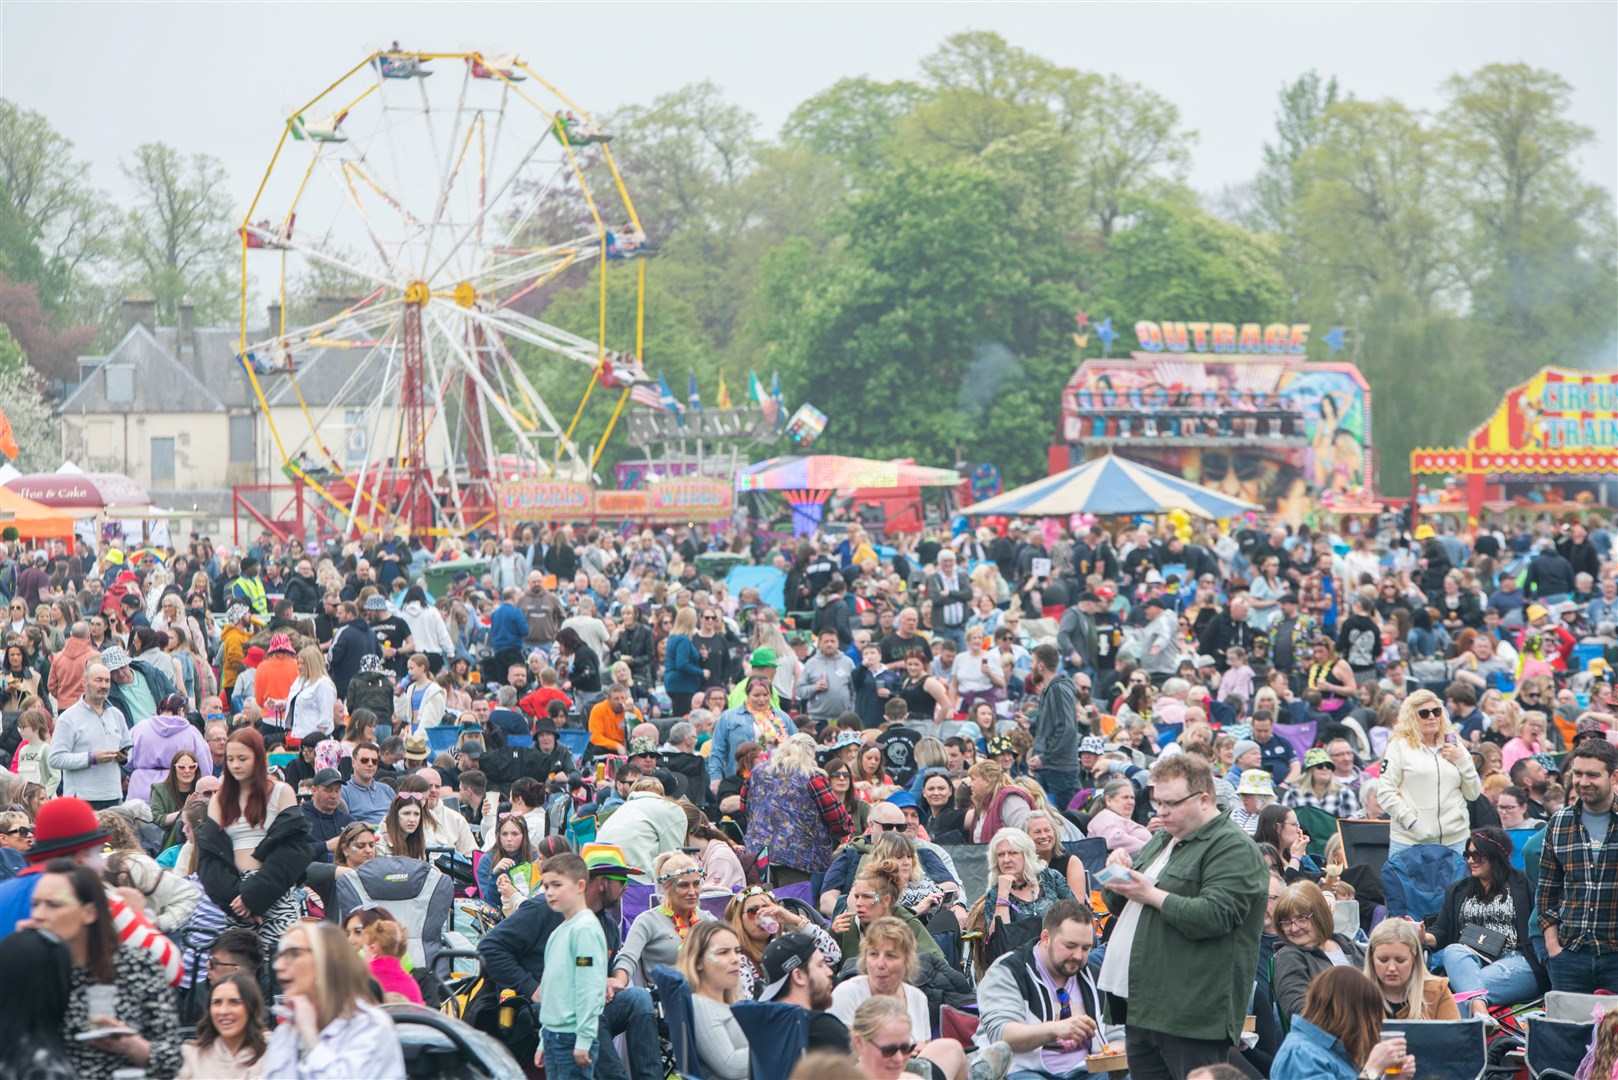 Crowds flocked to Cooper Park for the festival. Picture: Daniel Forsyth.